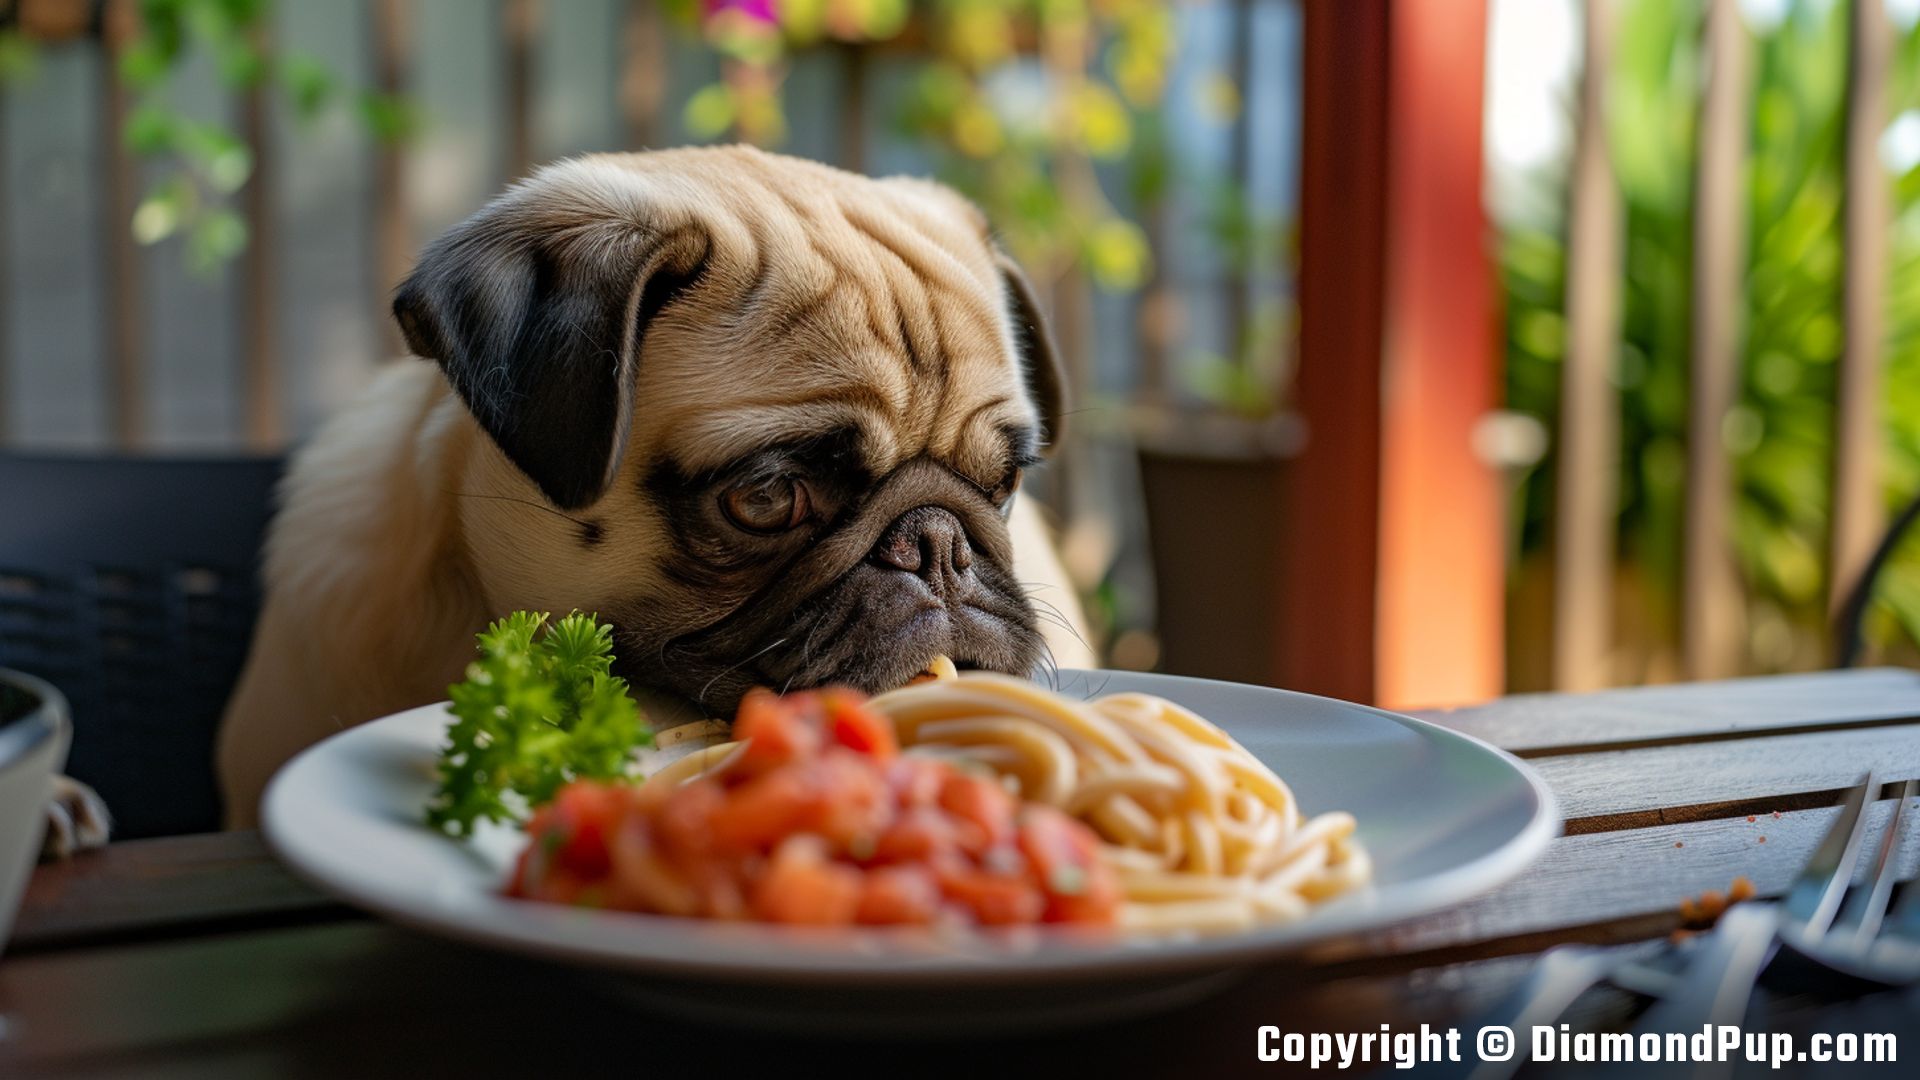 Image of a Happy Pug Snacking on Pasta